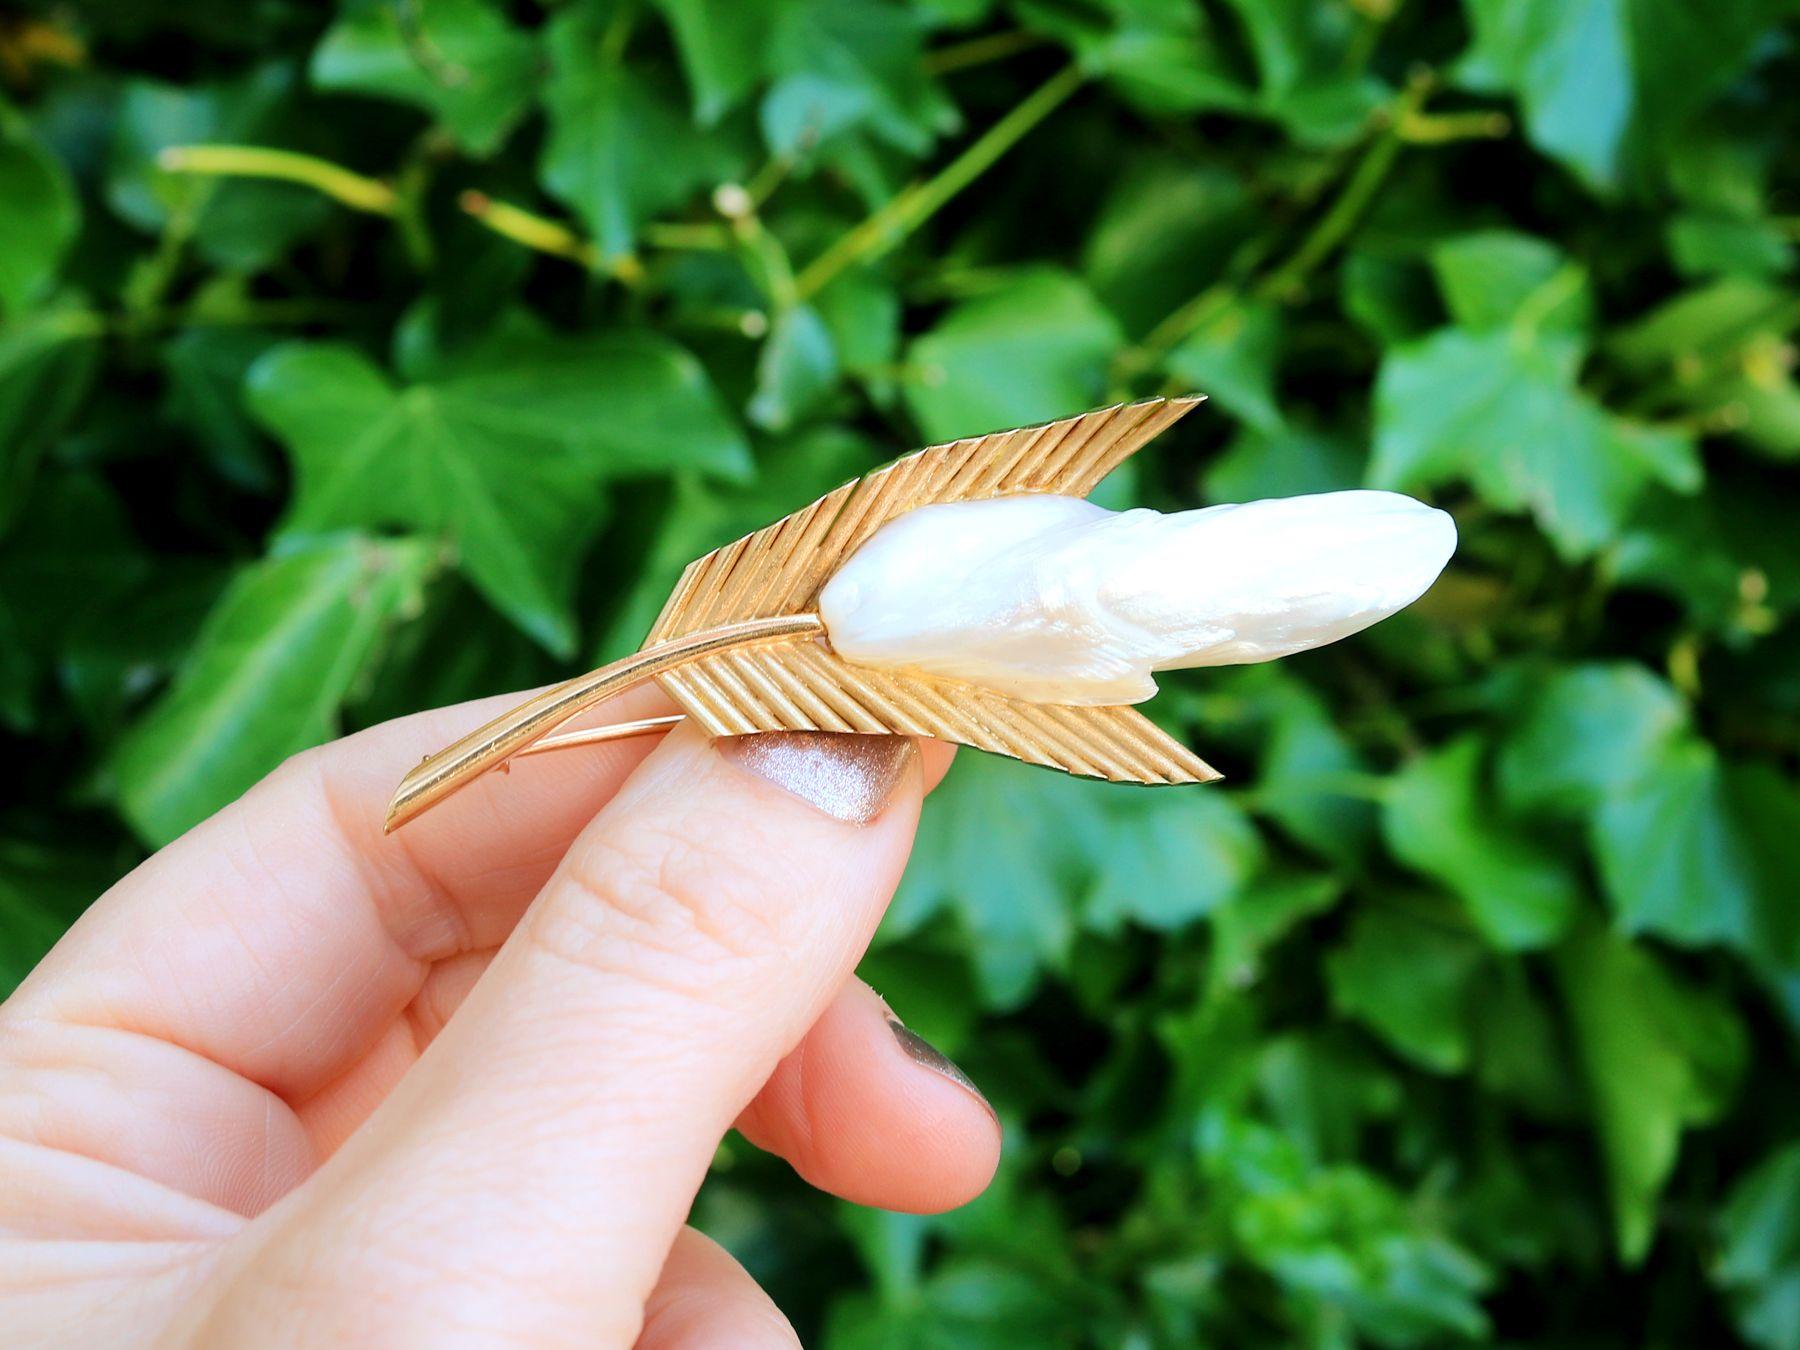 A stunning, fine and impressive vintage Mississippi river pearl and 18 karat yellow gold brooch in the form of a feather; part of our diverse vintage jewelry collections.

This stunning vintage French vintage pearl brooch has been crafted in 18k